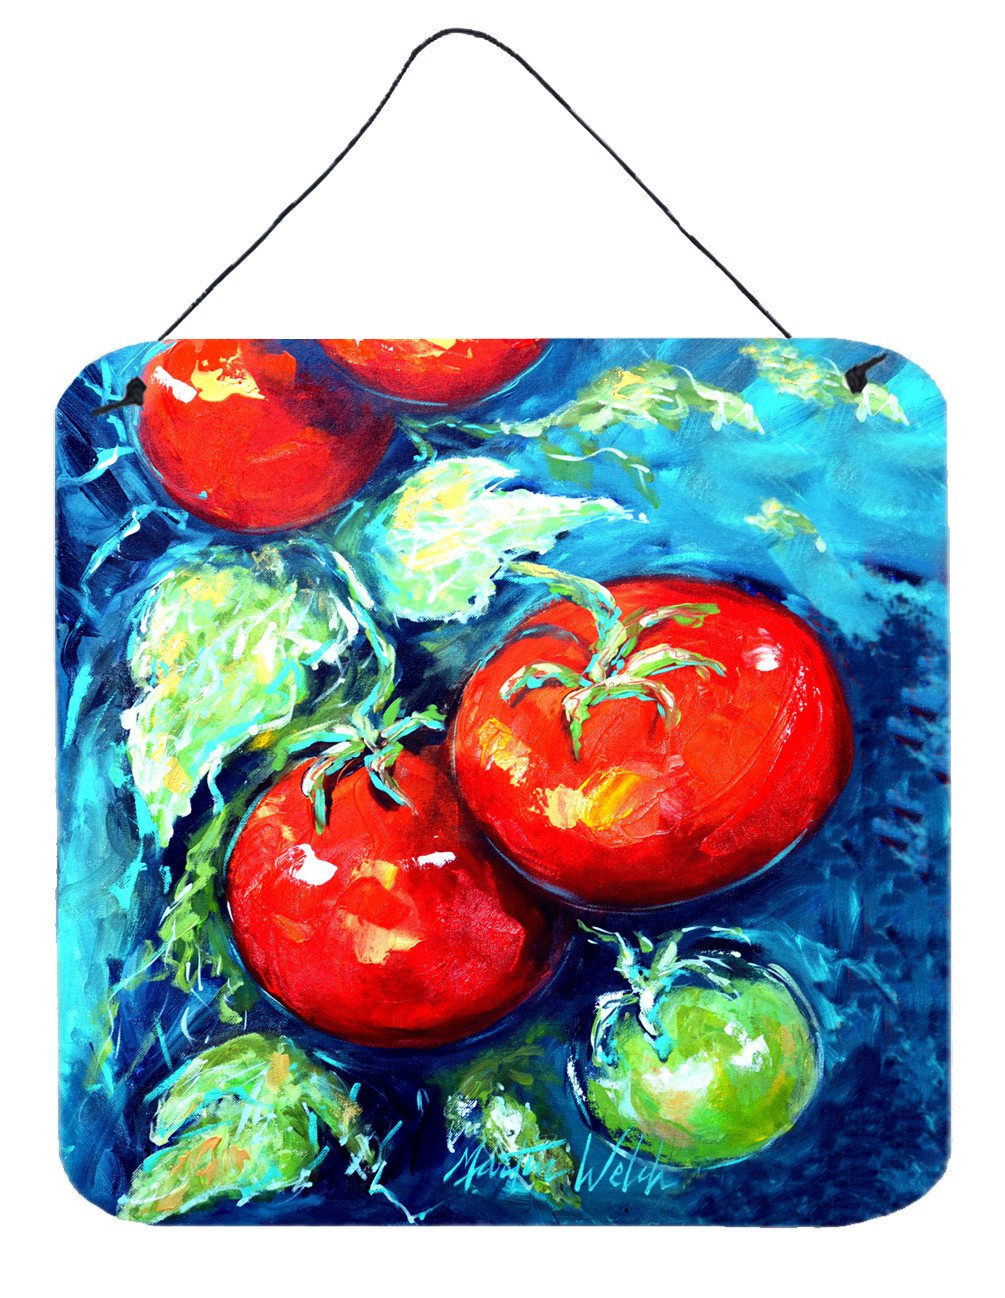 Vegetables - Tomatoes on the vine Wall or Door Hanging Prints MW1148DS66 by Caroline's Treasures